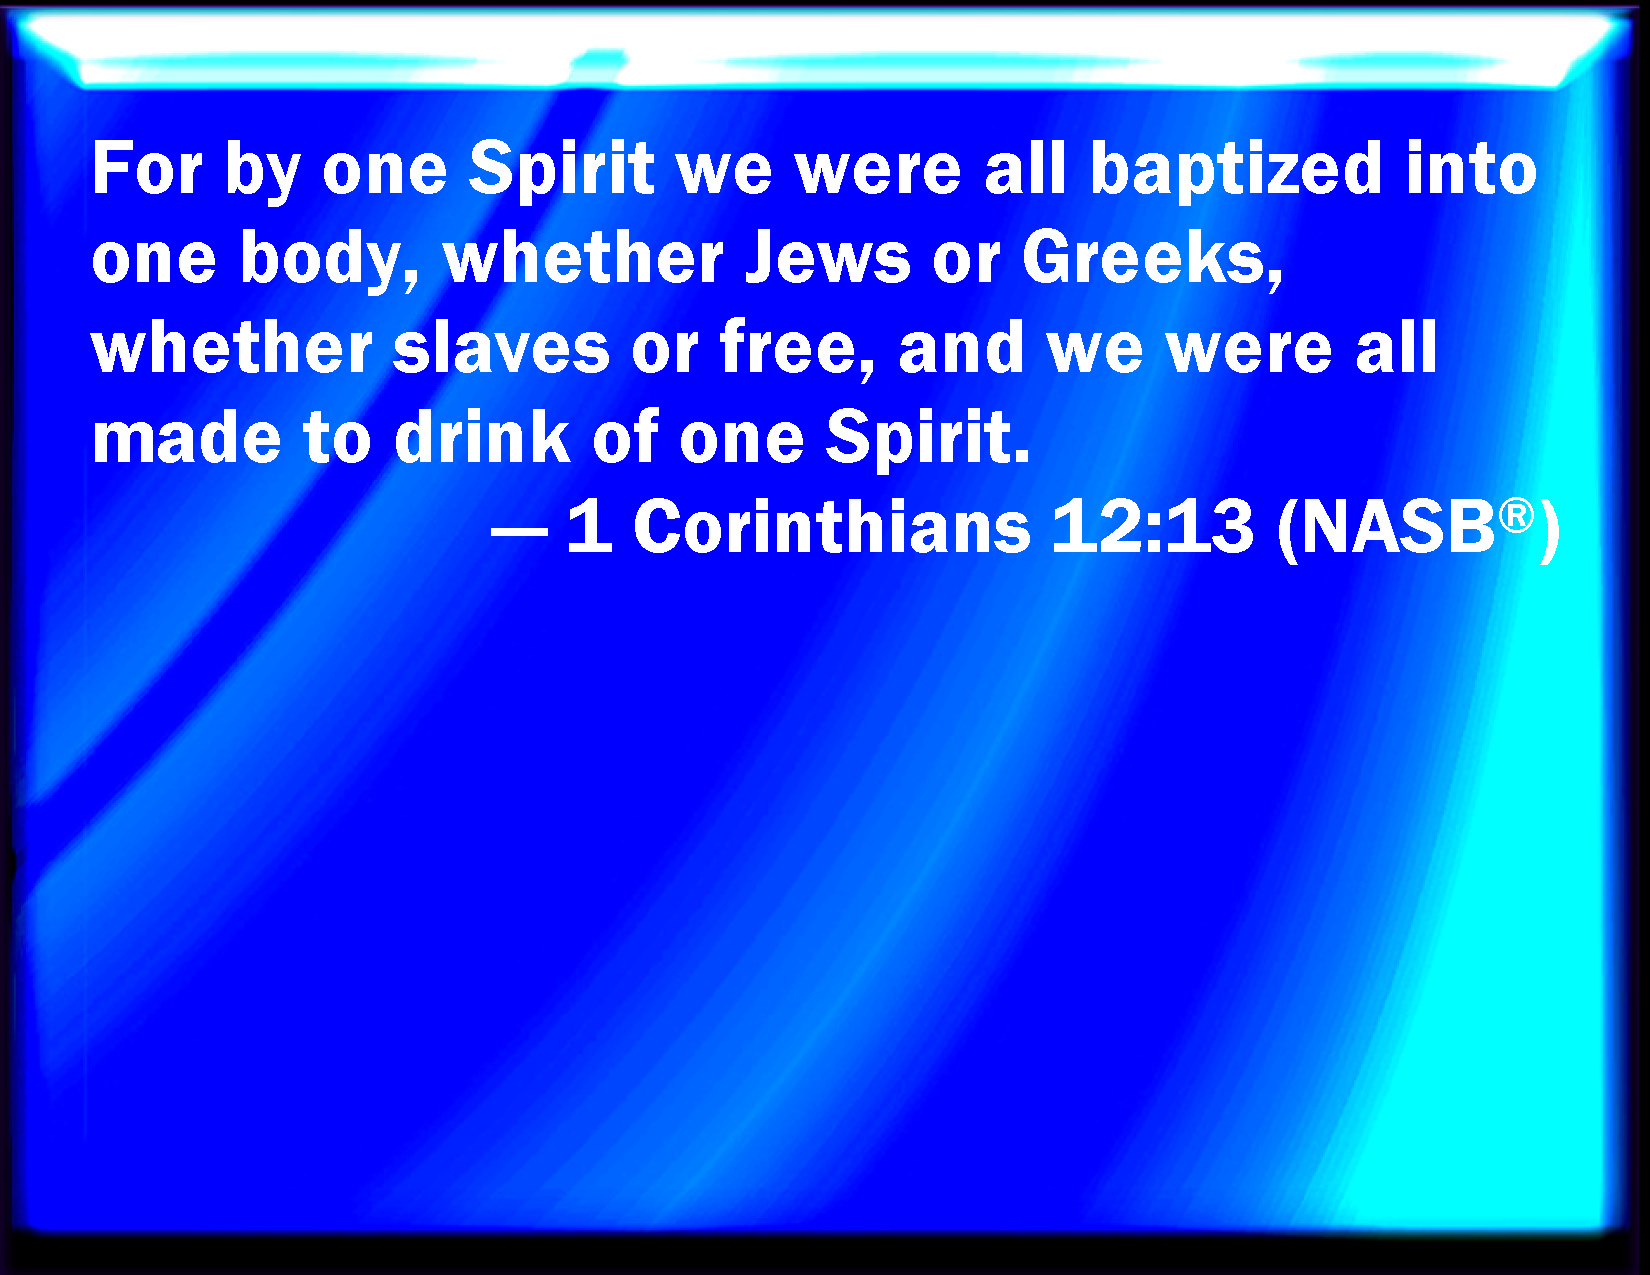 by one spirit are we all baptized